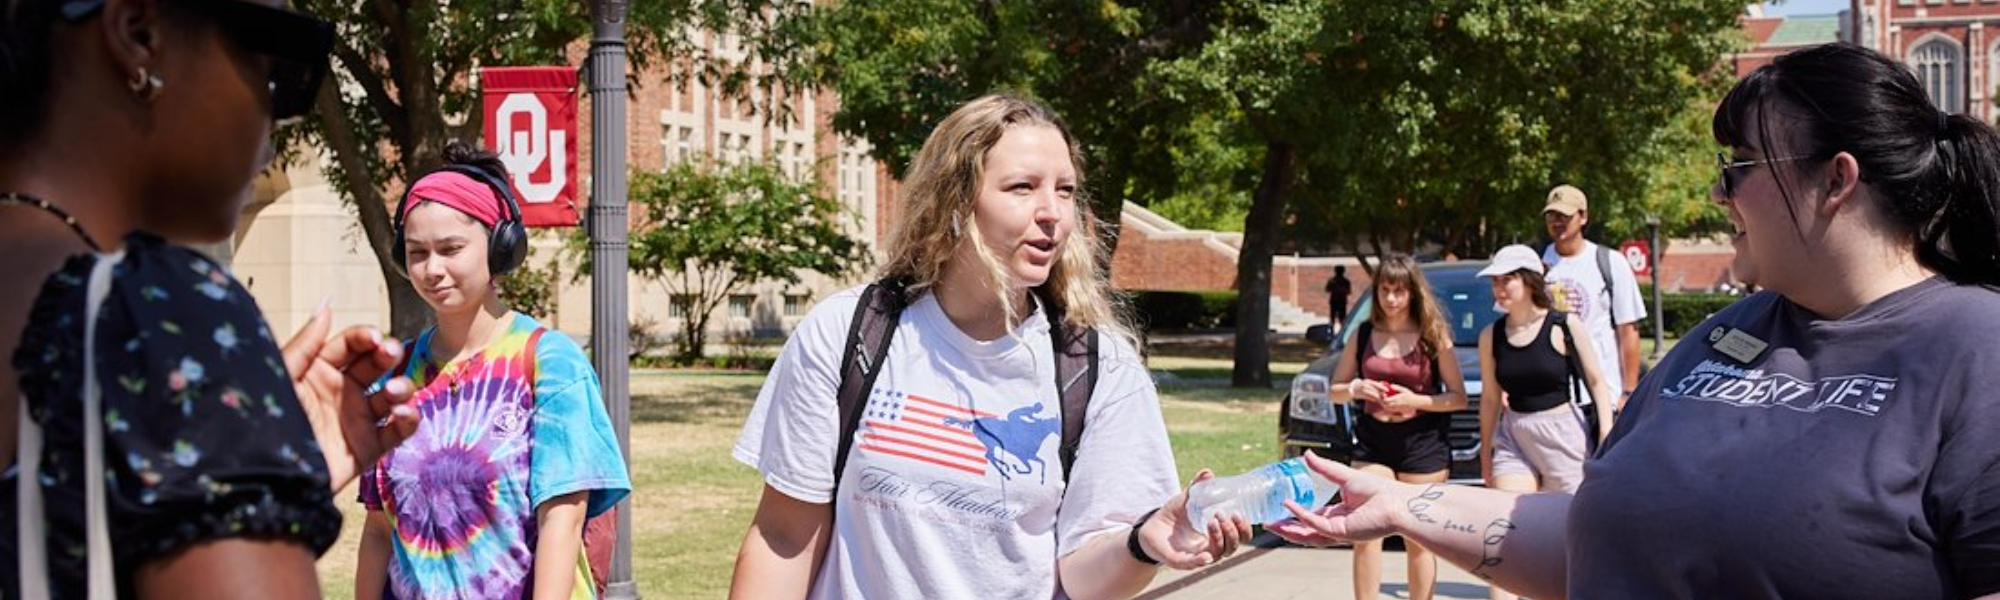 A Student Life staff member handing a student a bottle of water.